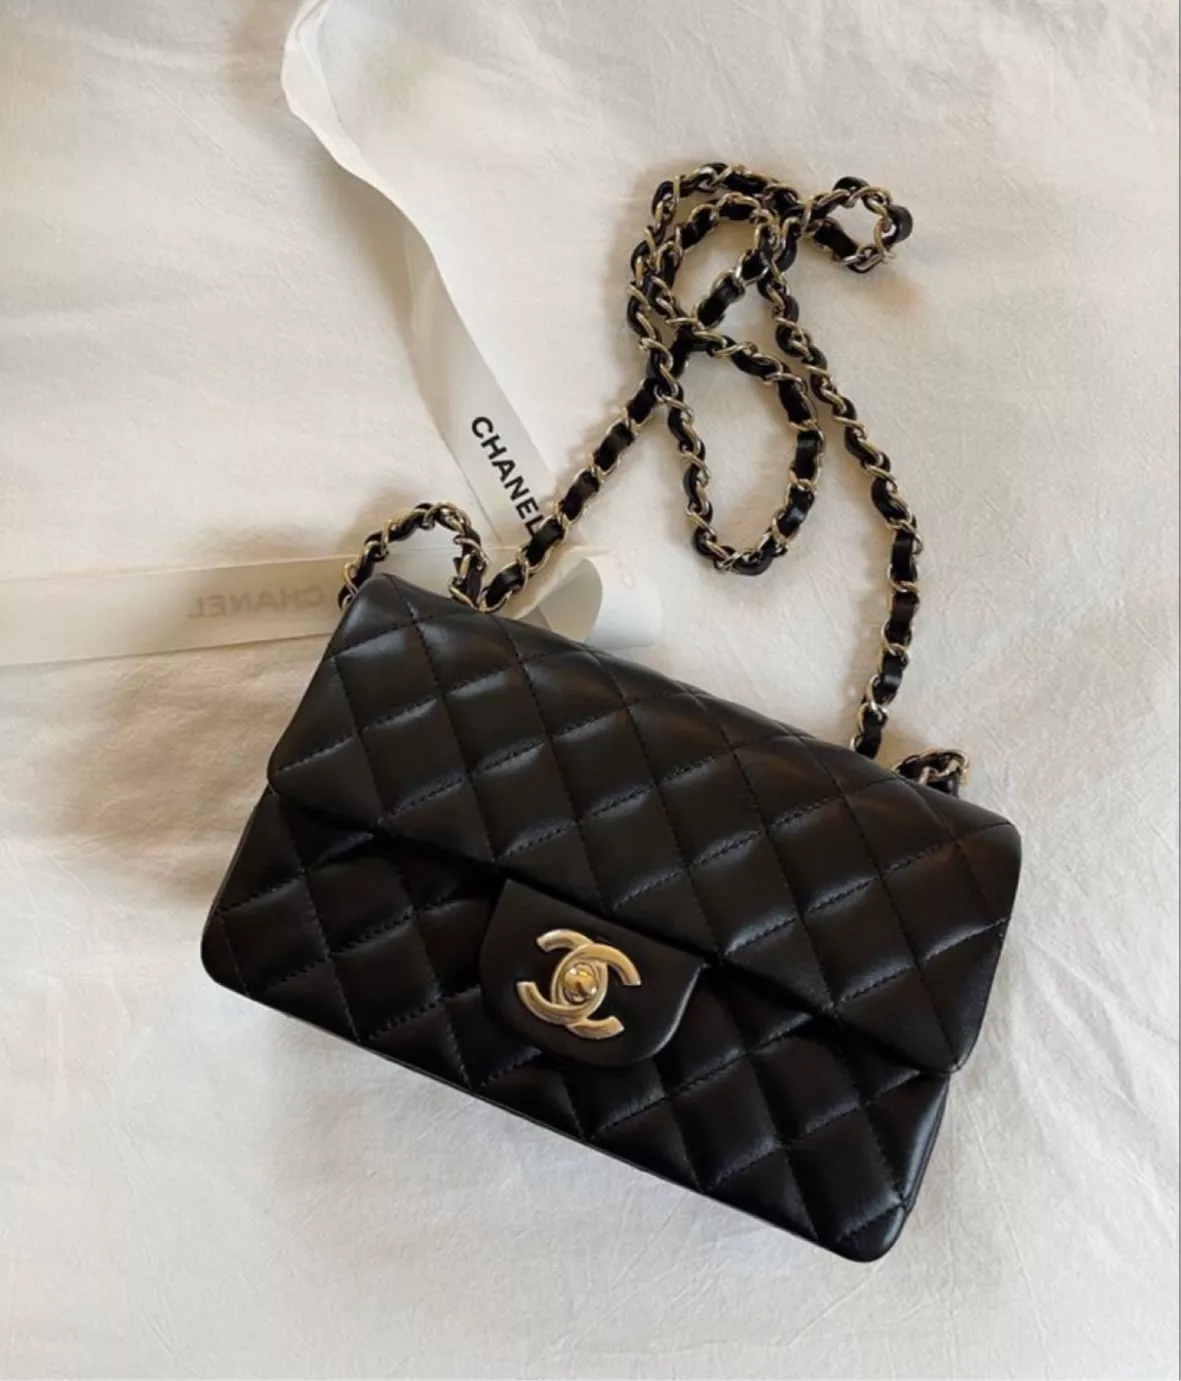 QC Chanel Top Handle & Chanel Double Flap w/ Gold Hardware : r/DHgate